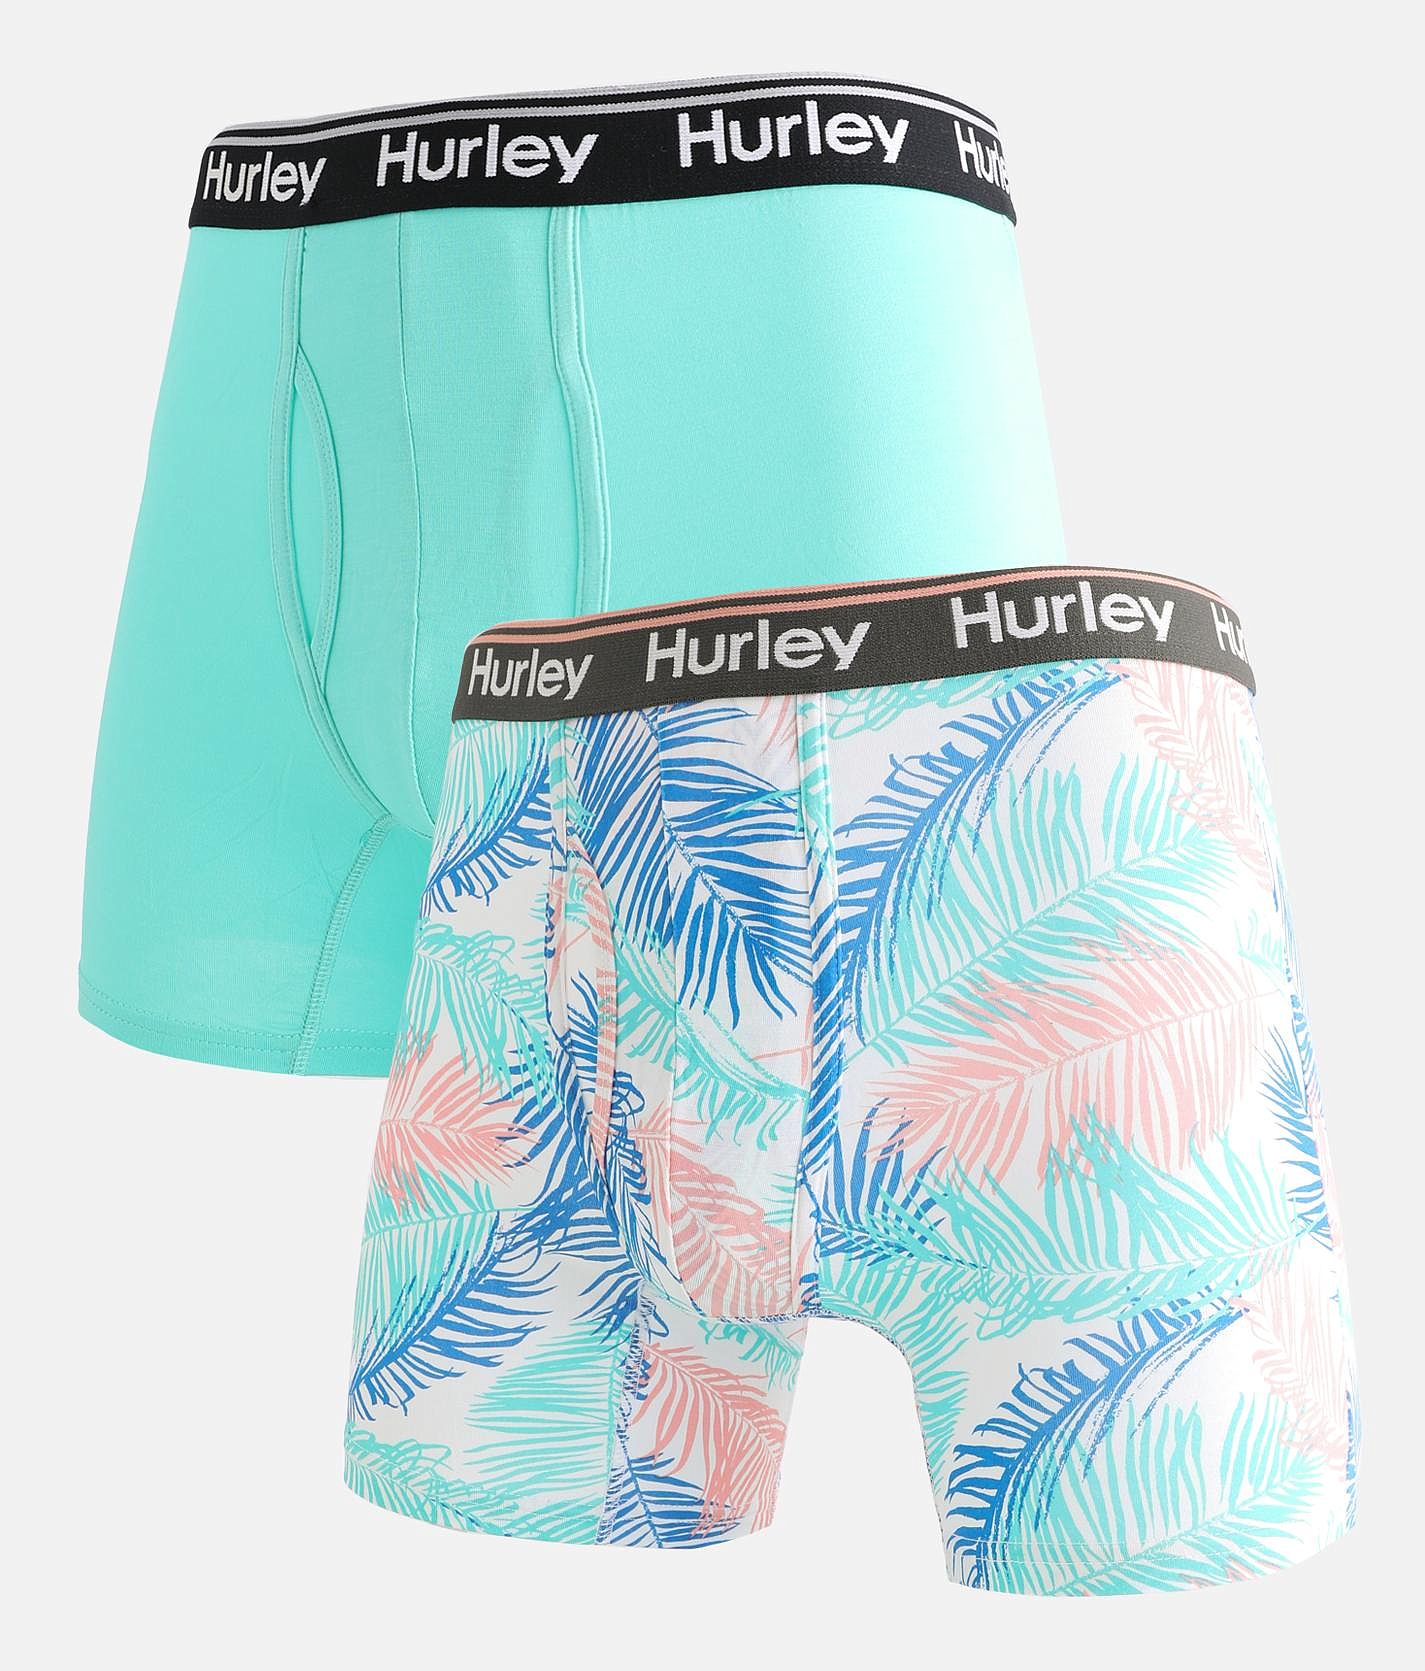 Hurley 2 Pack Of Grey & Blue Boxer Brief Shorts Men's Size Large